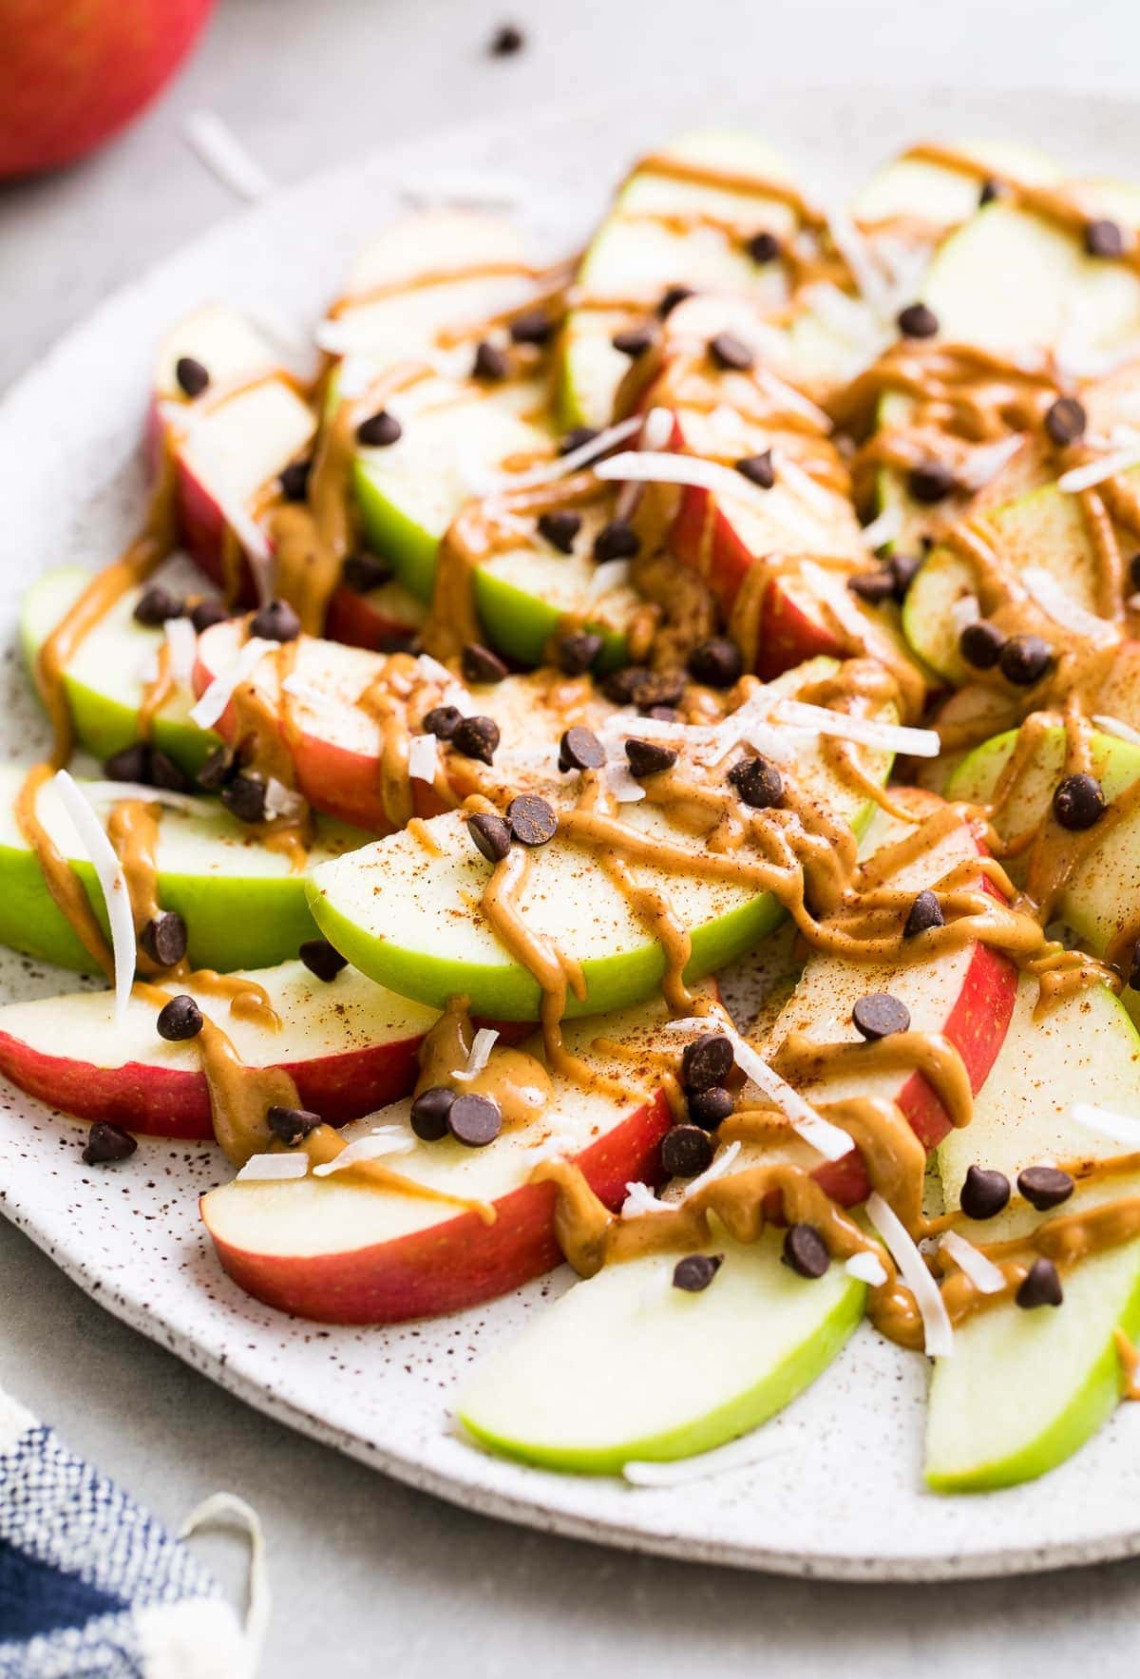 Sliced apples with peanut butter drizzle, chocoloate chips, and nuts